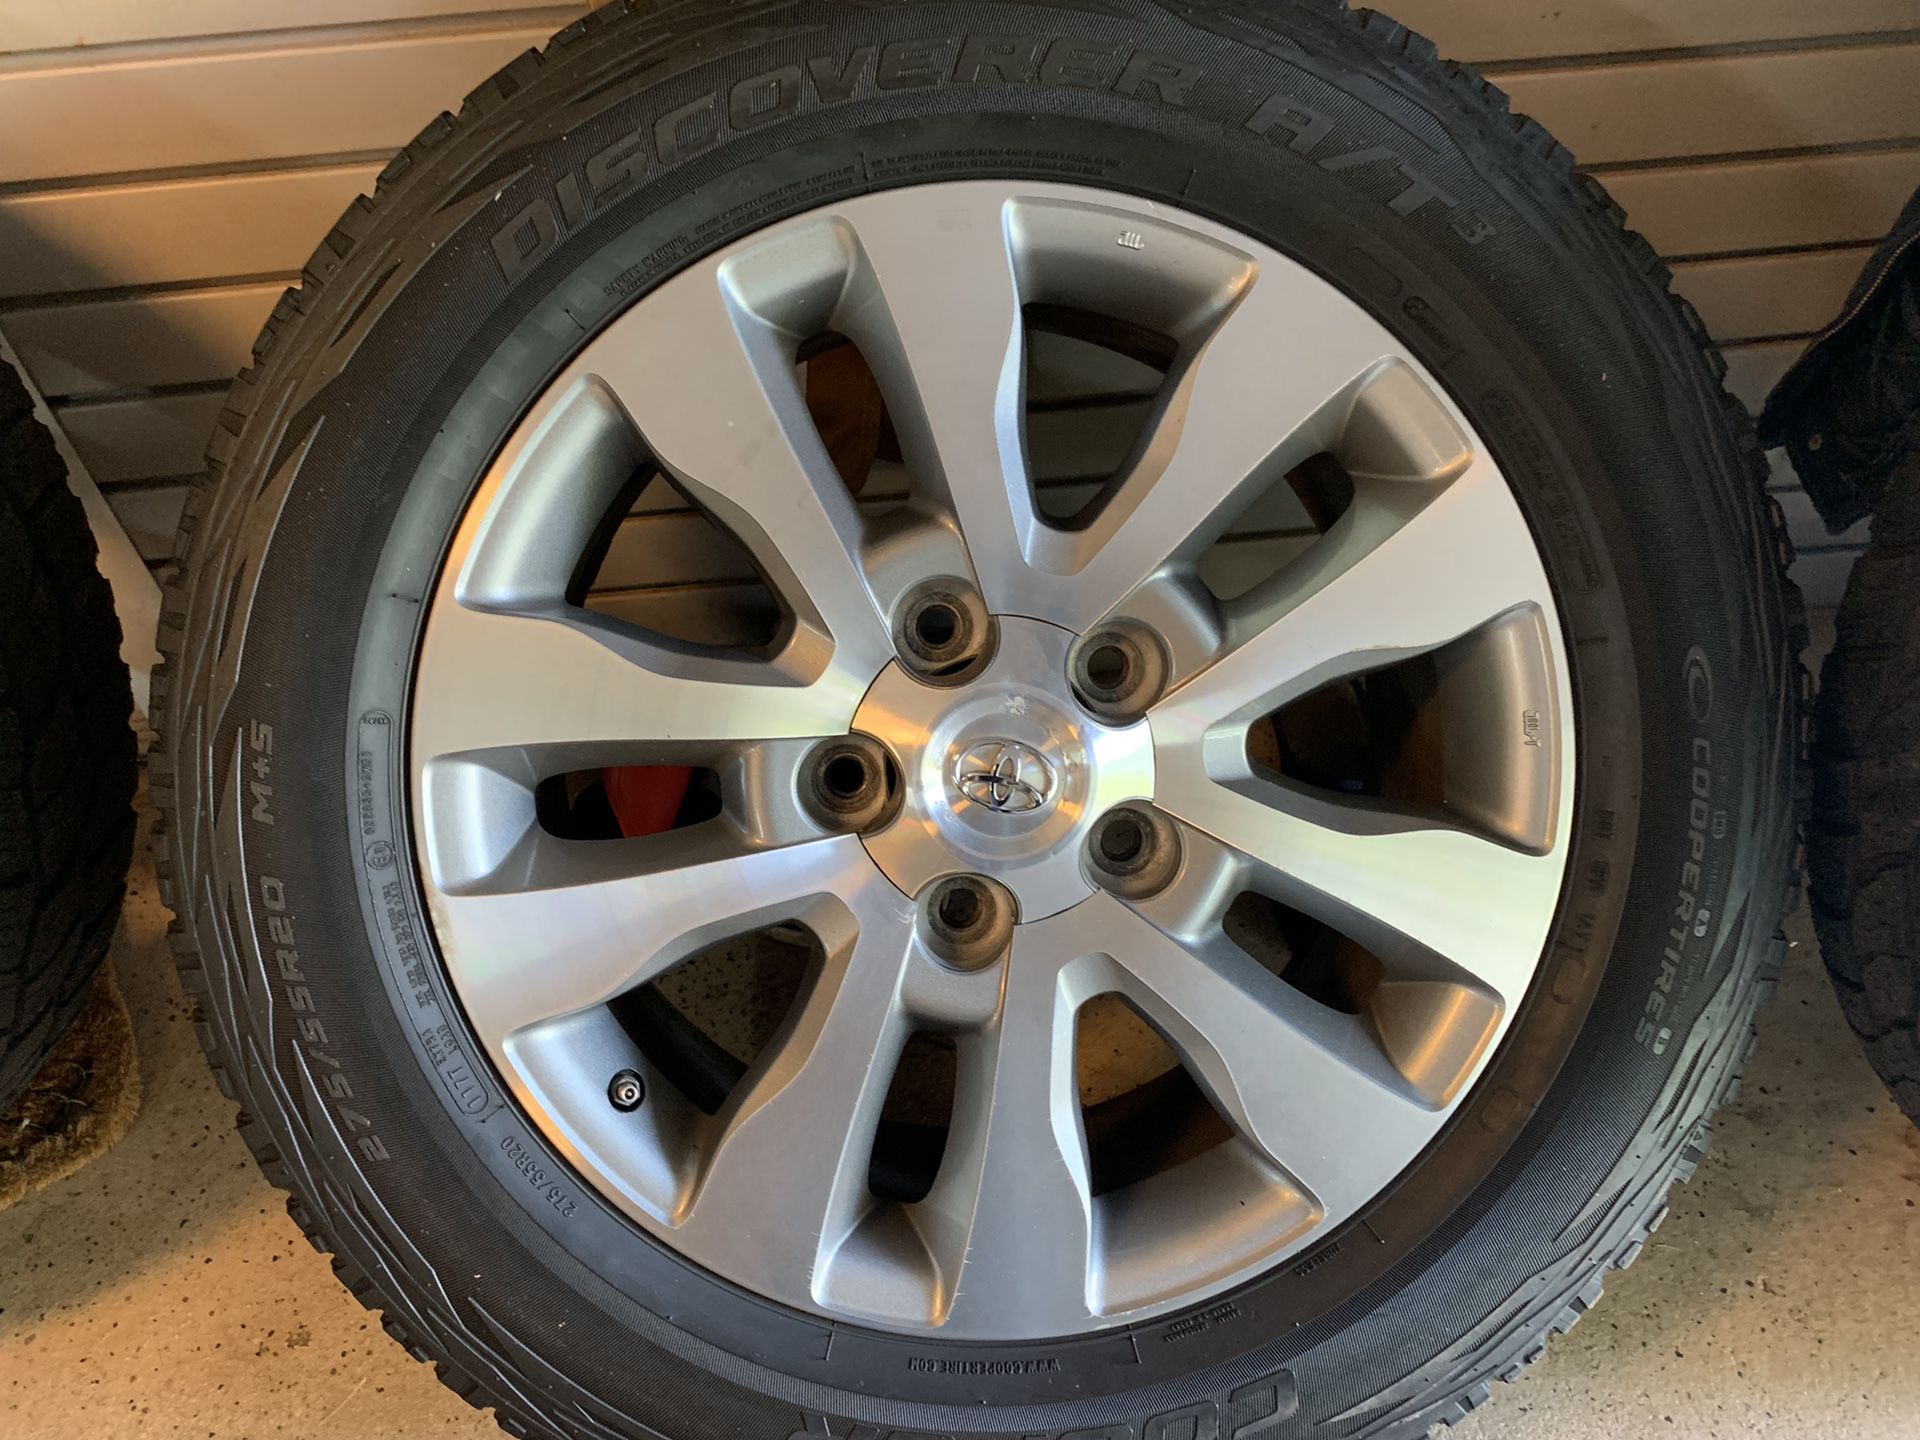 Toyota 20” wheel and tires